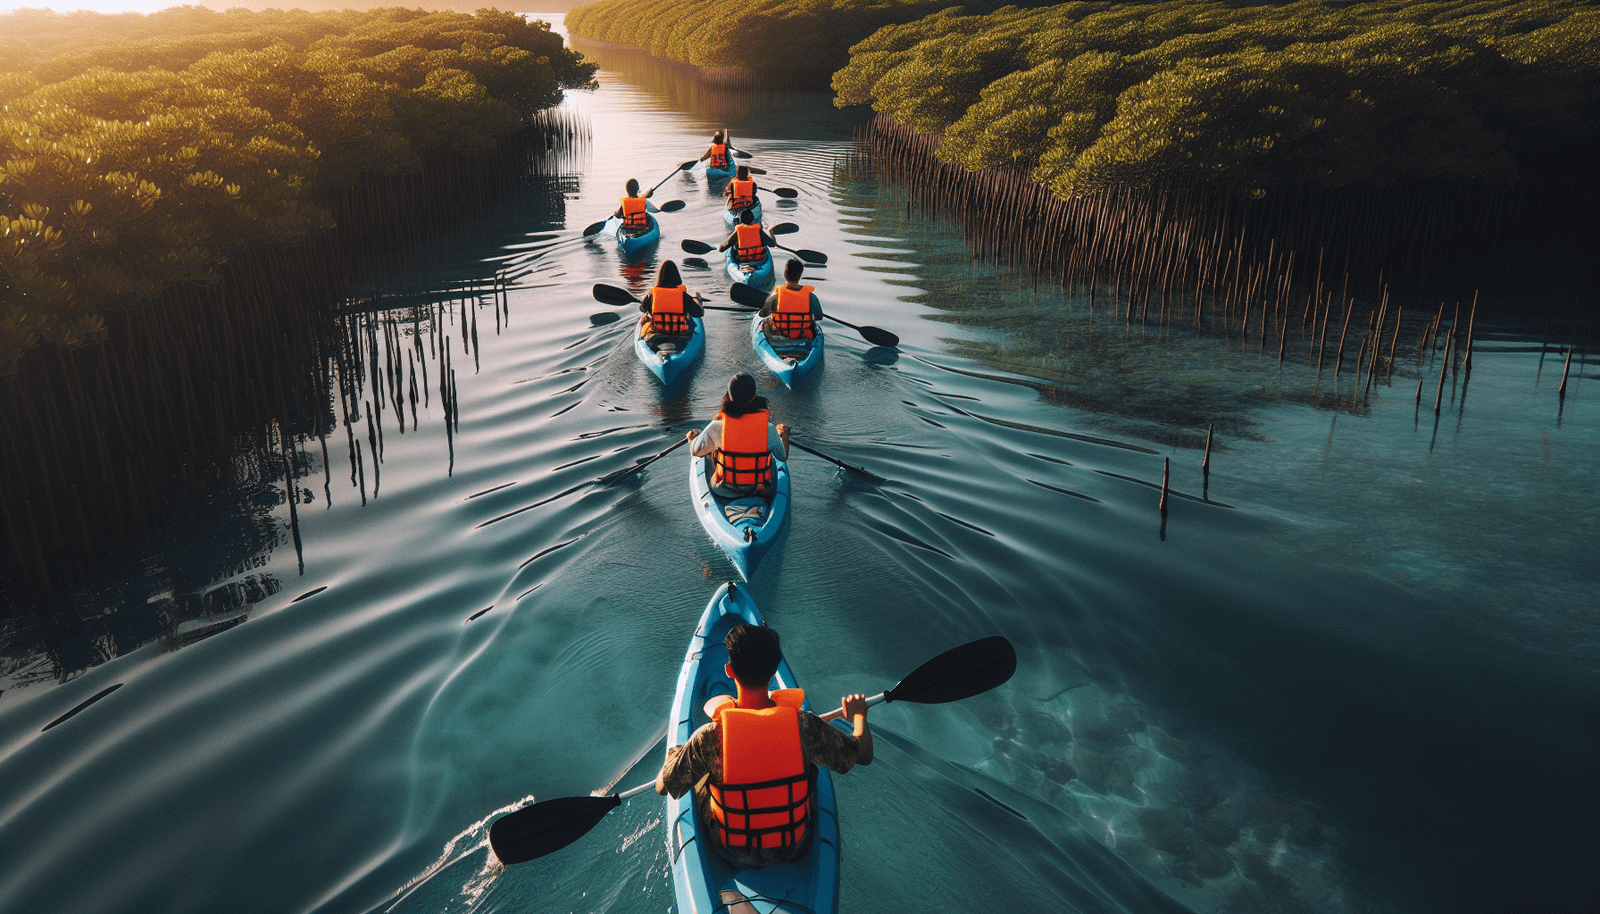 Responsible kayakers observing the mangrove ecosystem from a distance